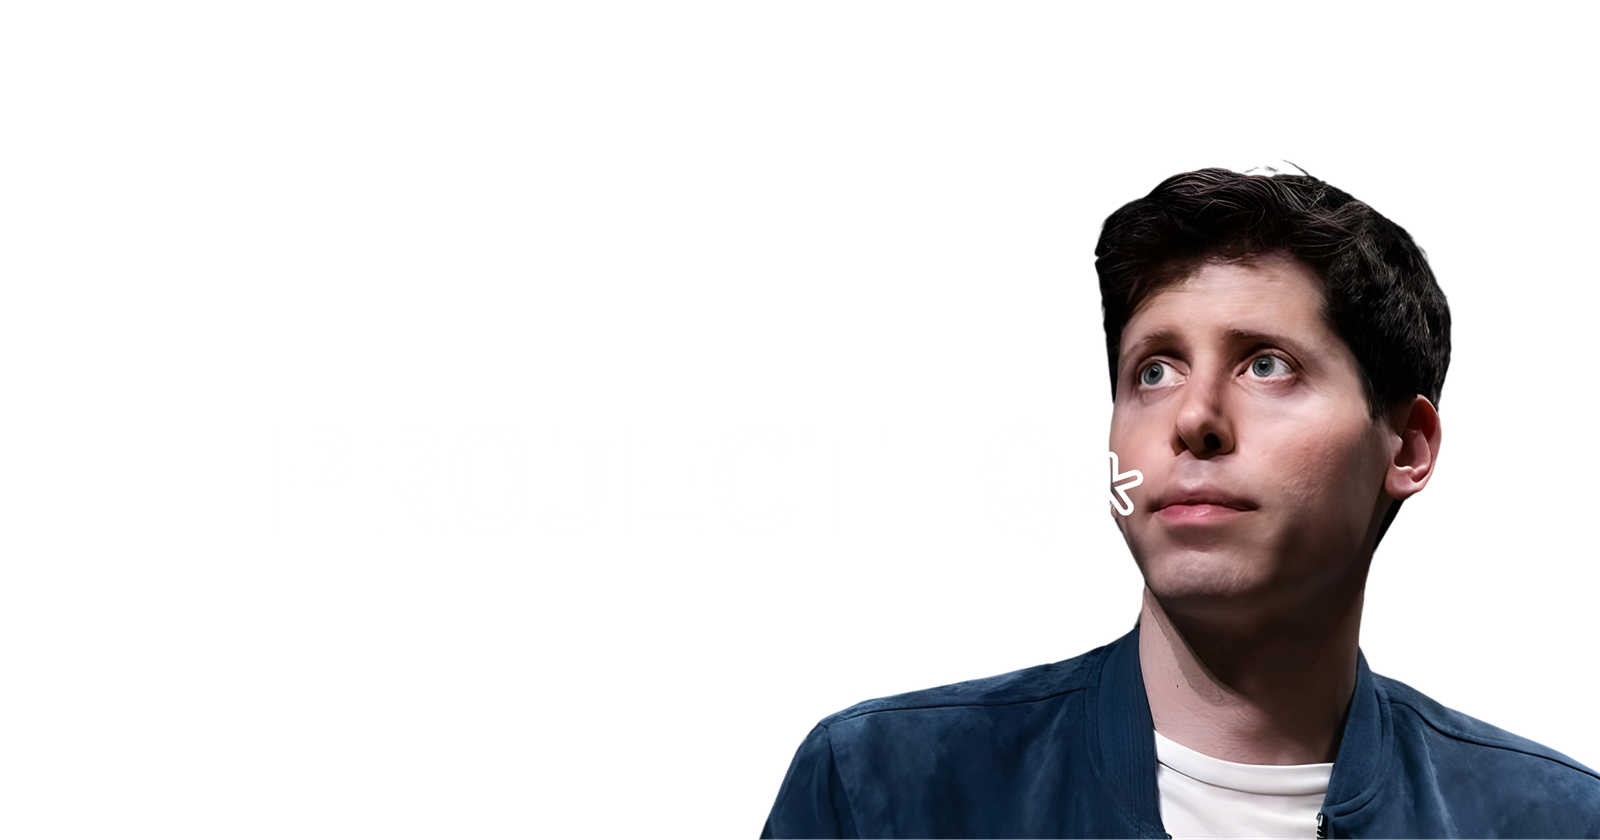 Sam Altman and Project Q*: An OpenAI Mystery